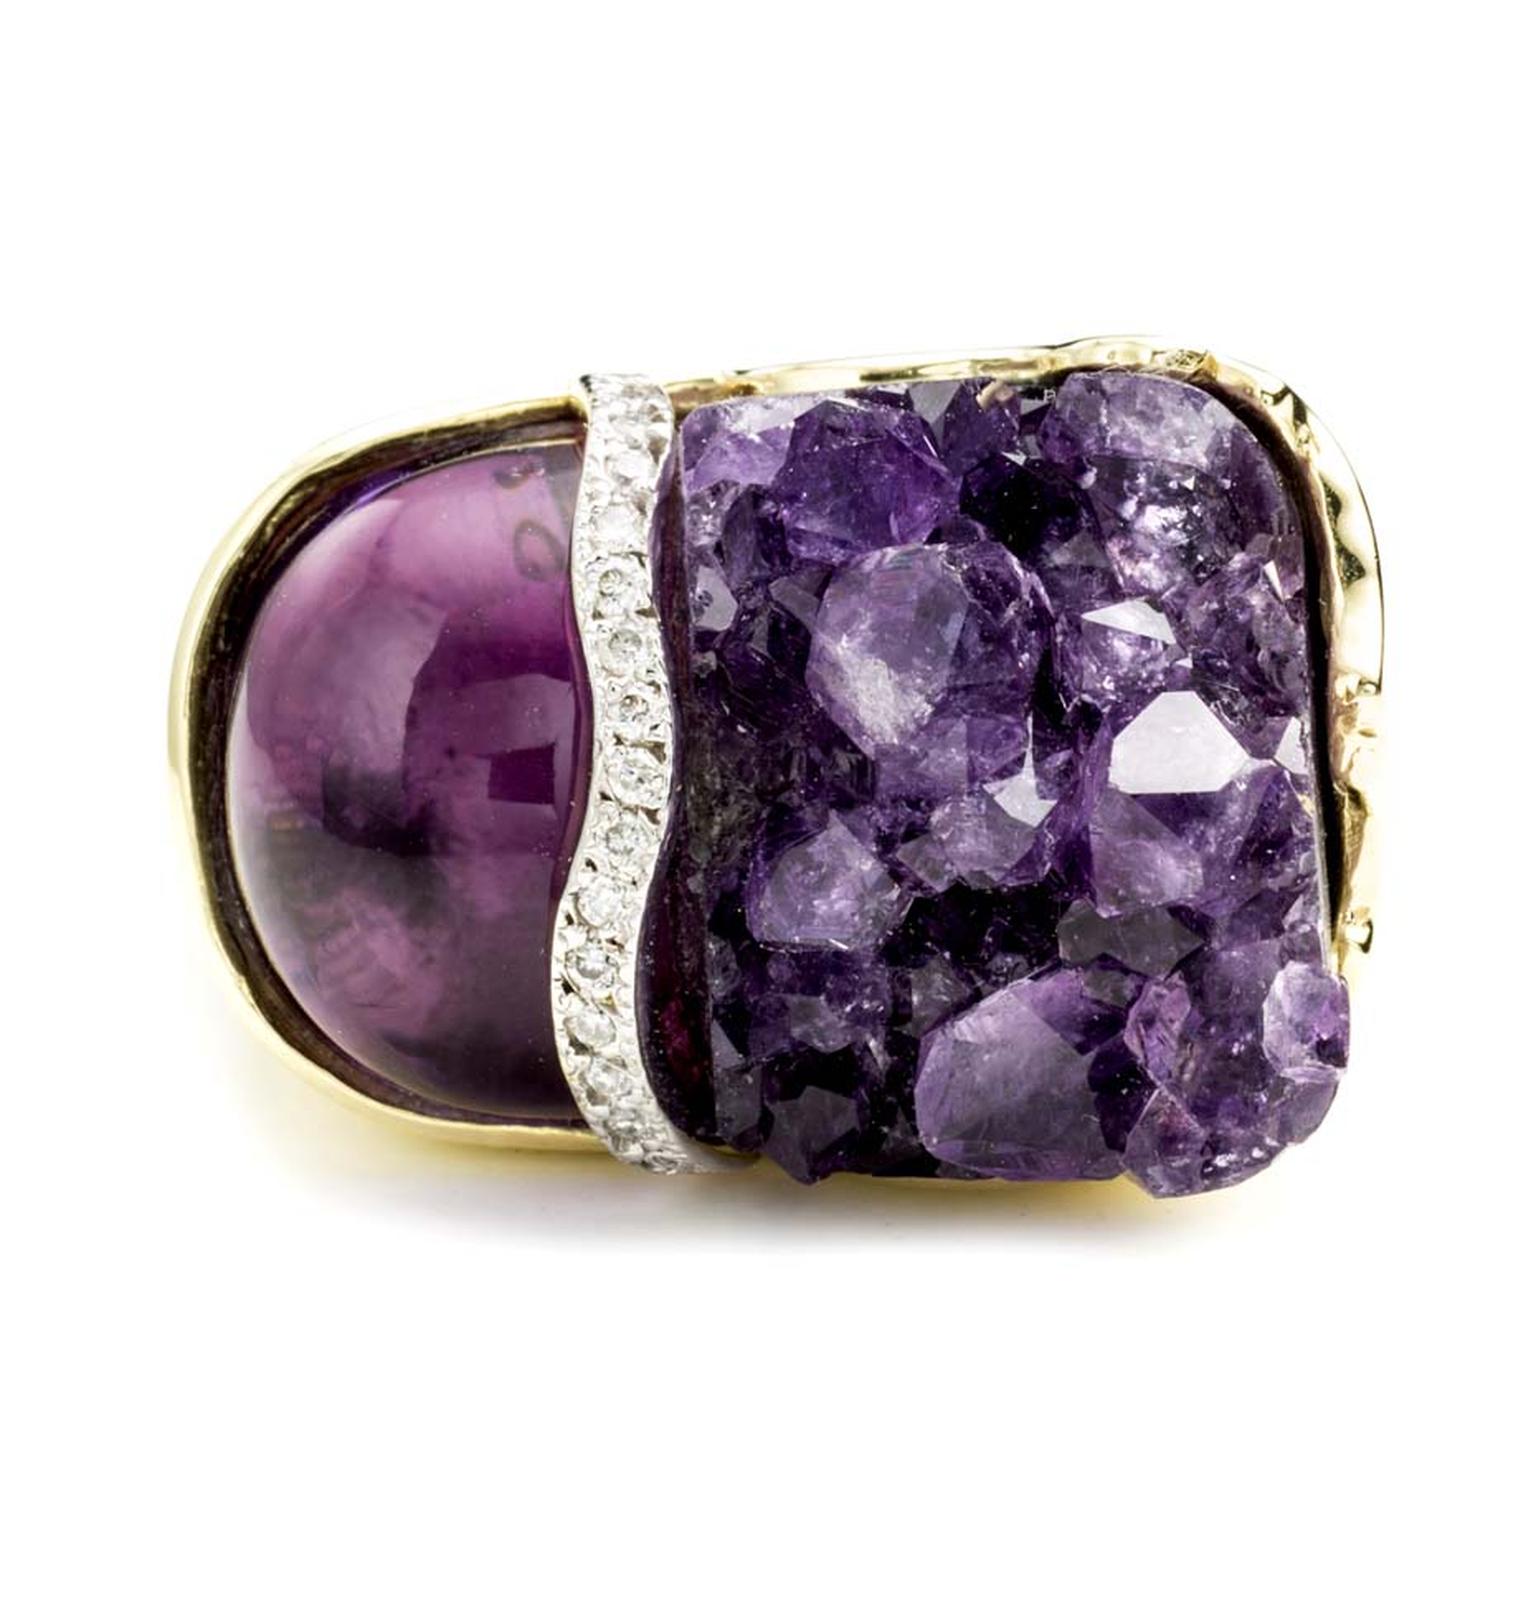 Kara Ross loves the juxtaposition of rough and smooth gemstones